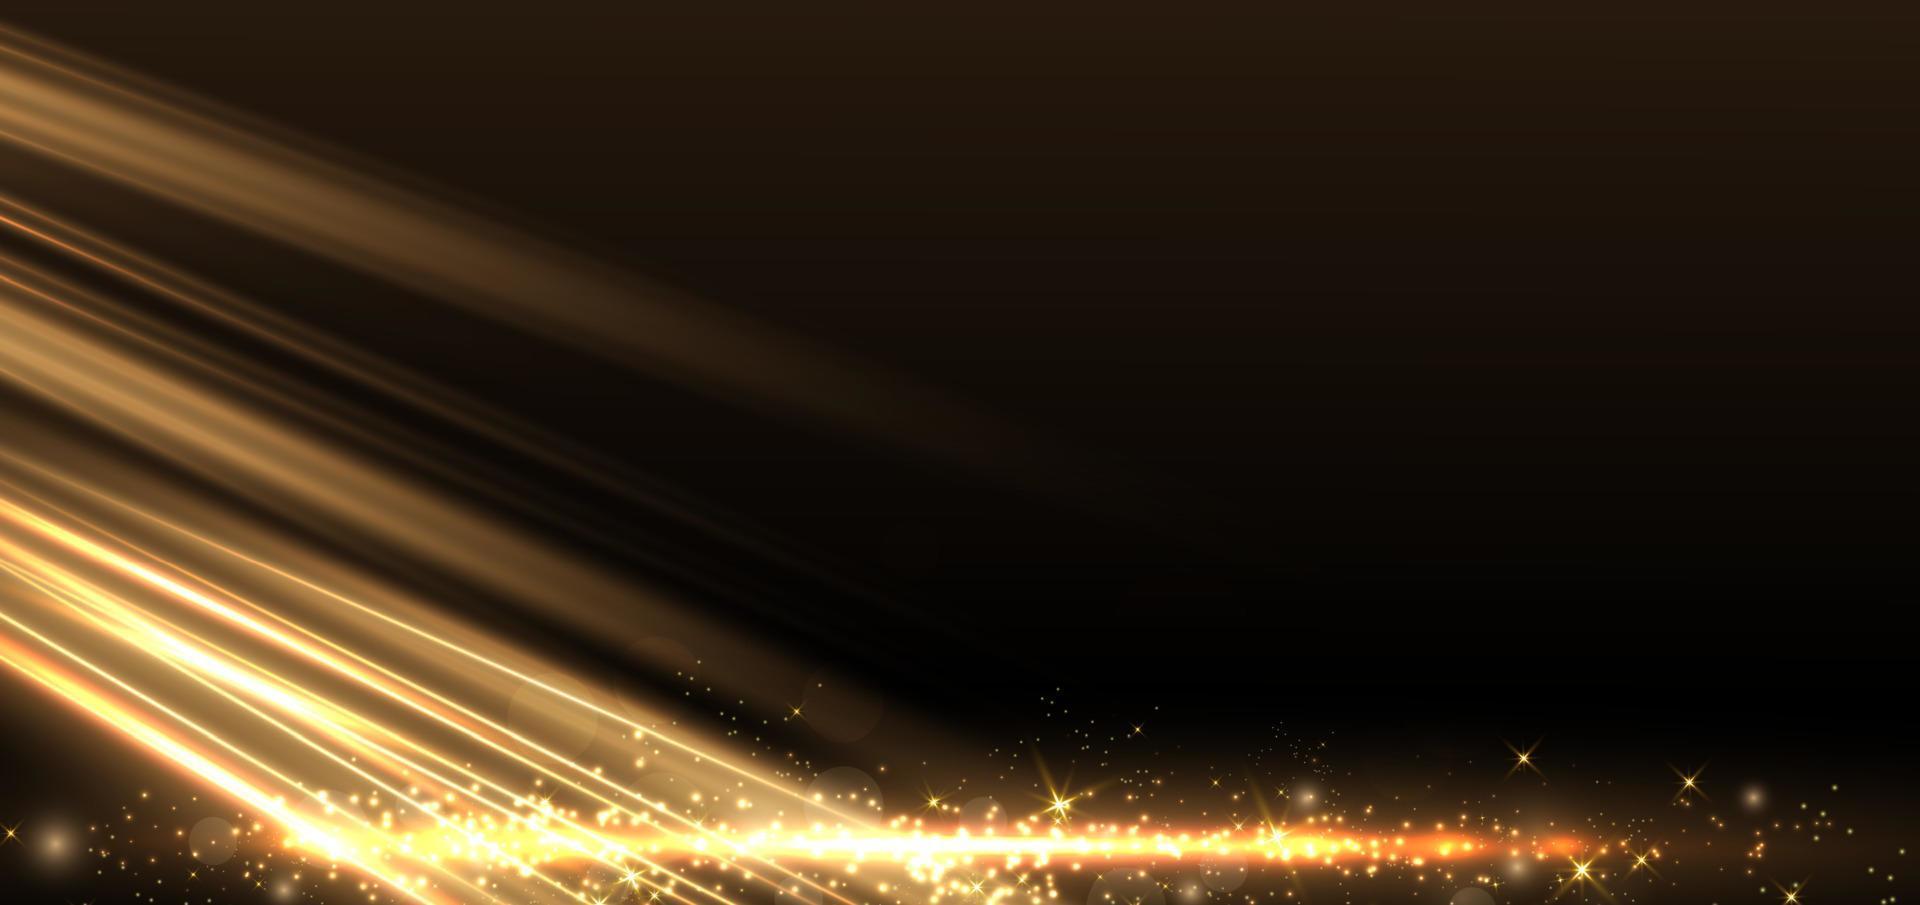 Abstract elegant gold glowing with lighting effect sparkle on black background. Template premium award design. vector